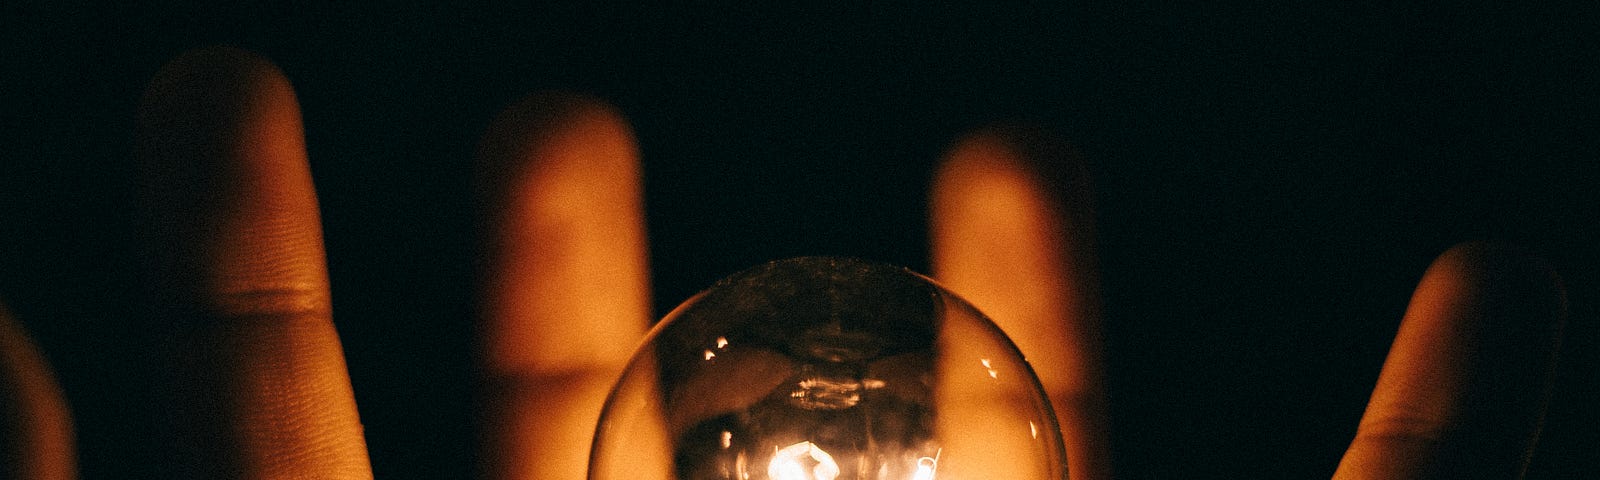 A palm faces away from us as an old-fashioned clear round lightbulb (with a lit filament) floats above it. Dark background.